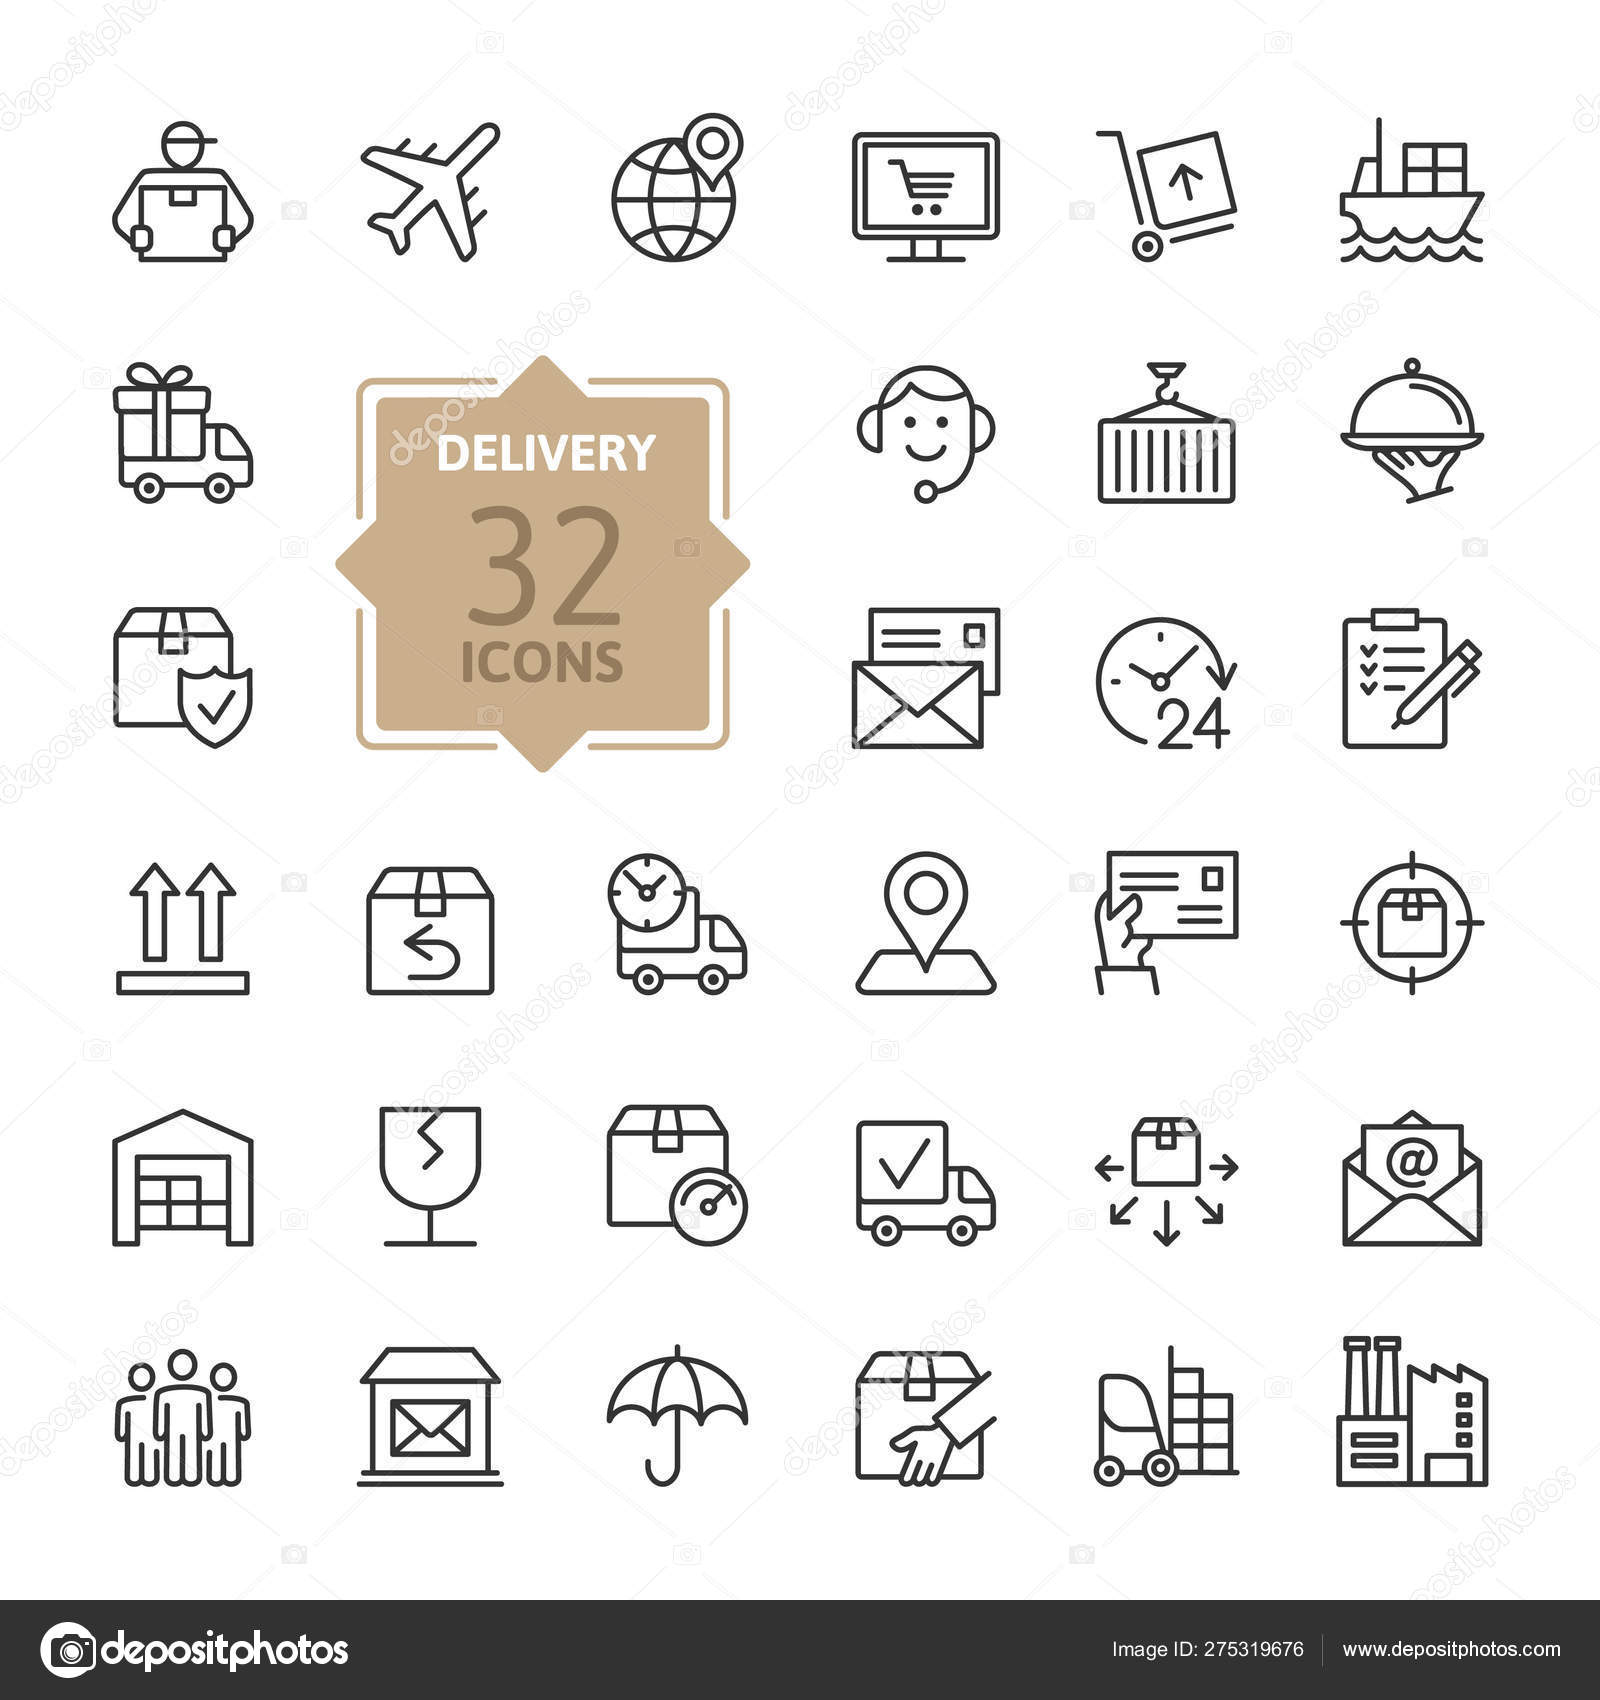 Delivery Icons Set. Collection Of Black And White Icons With